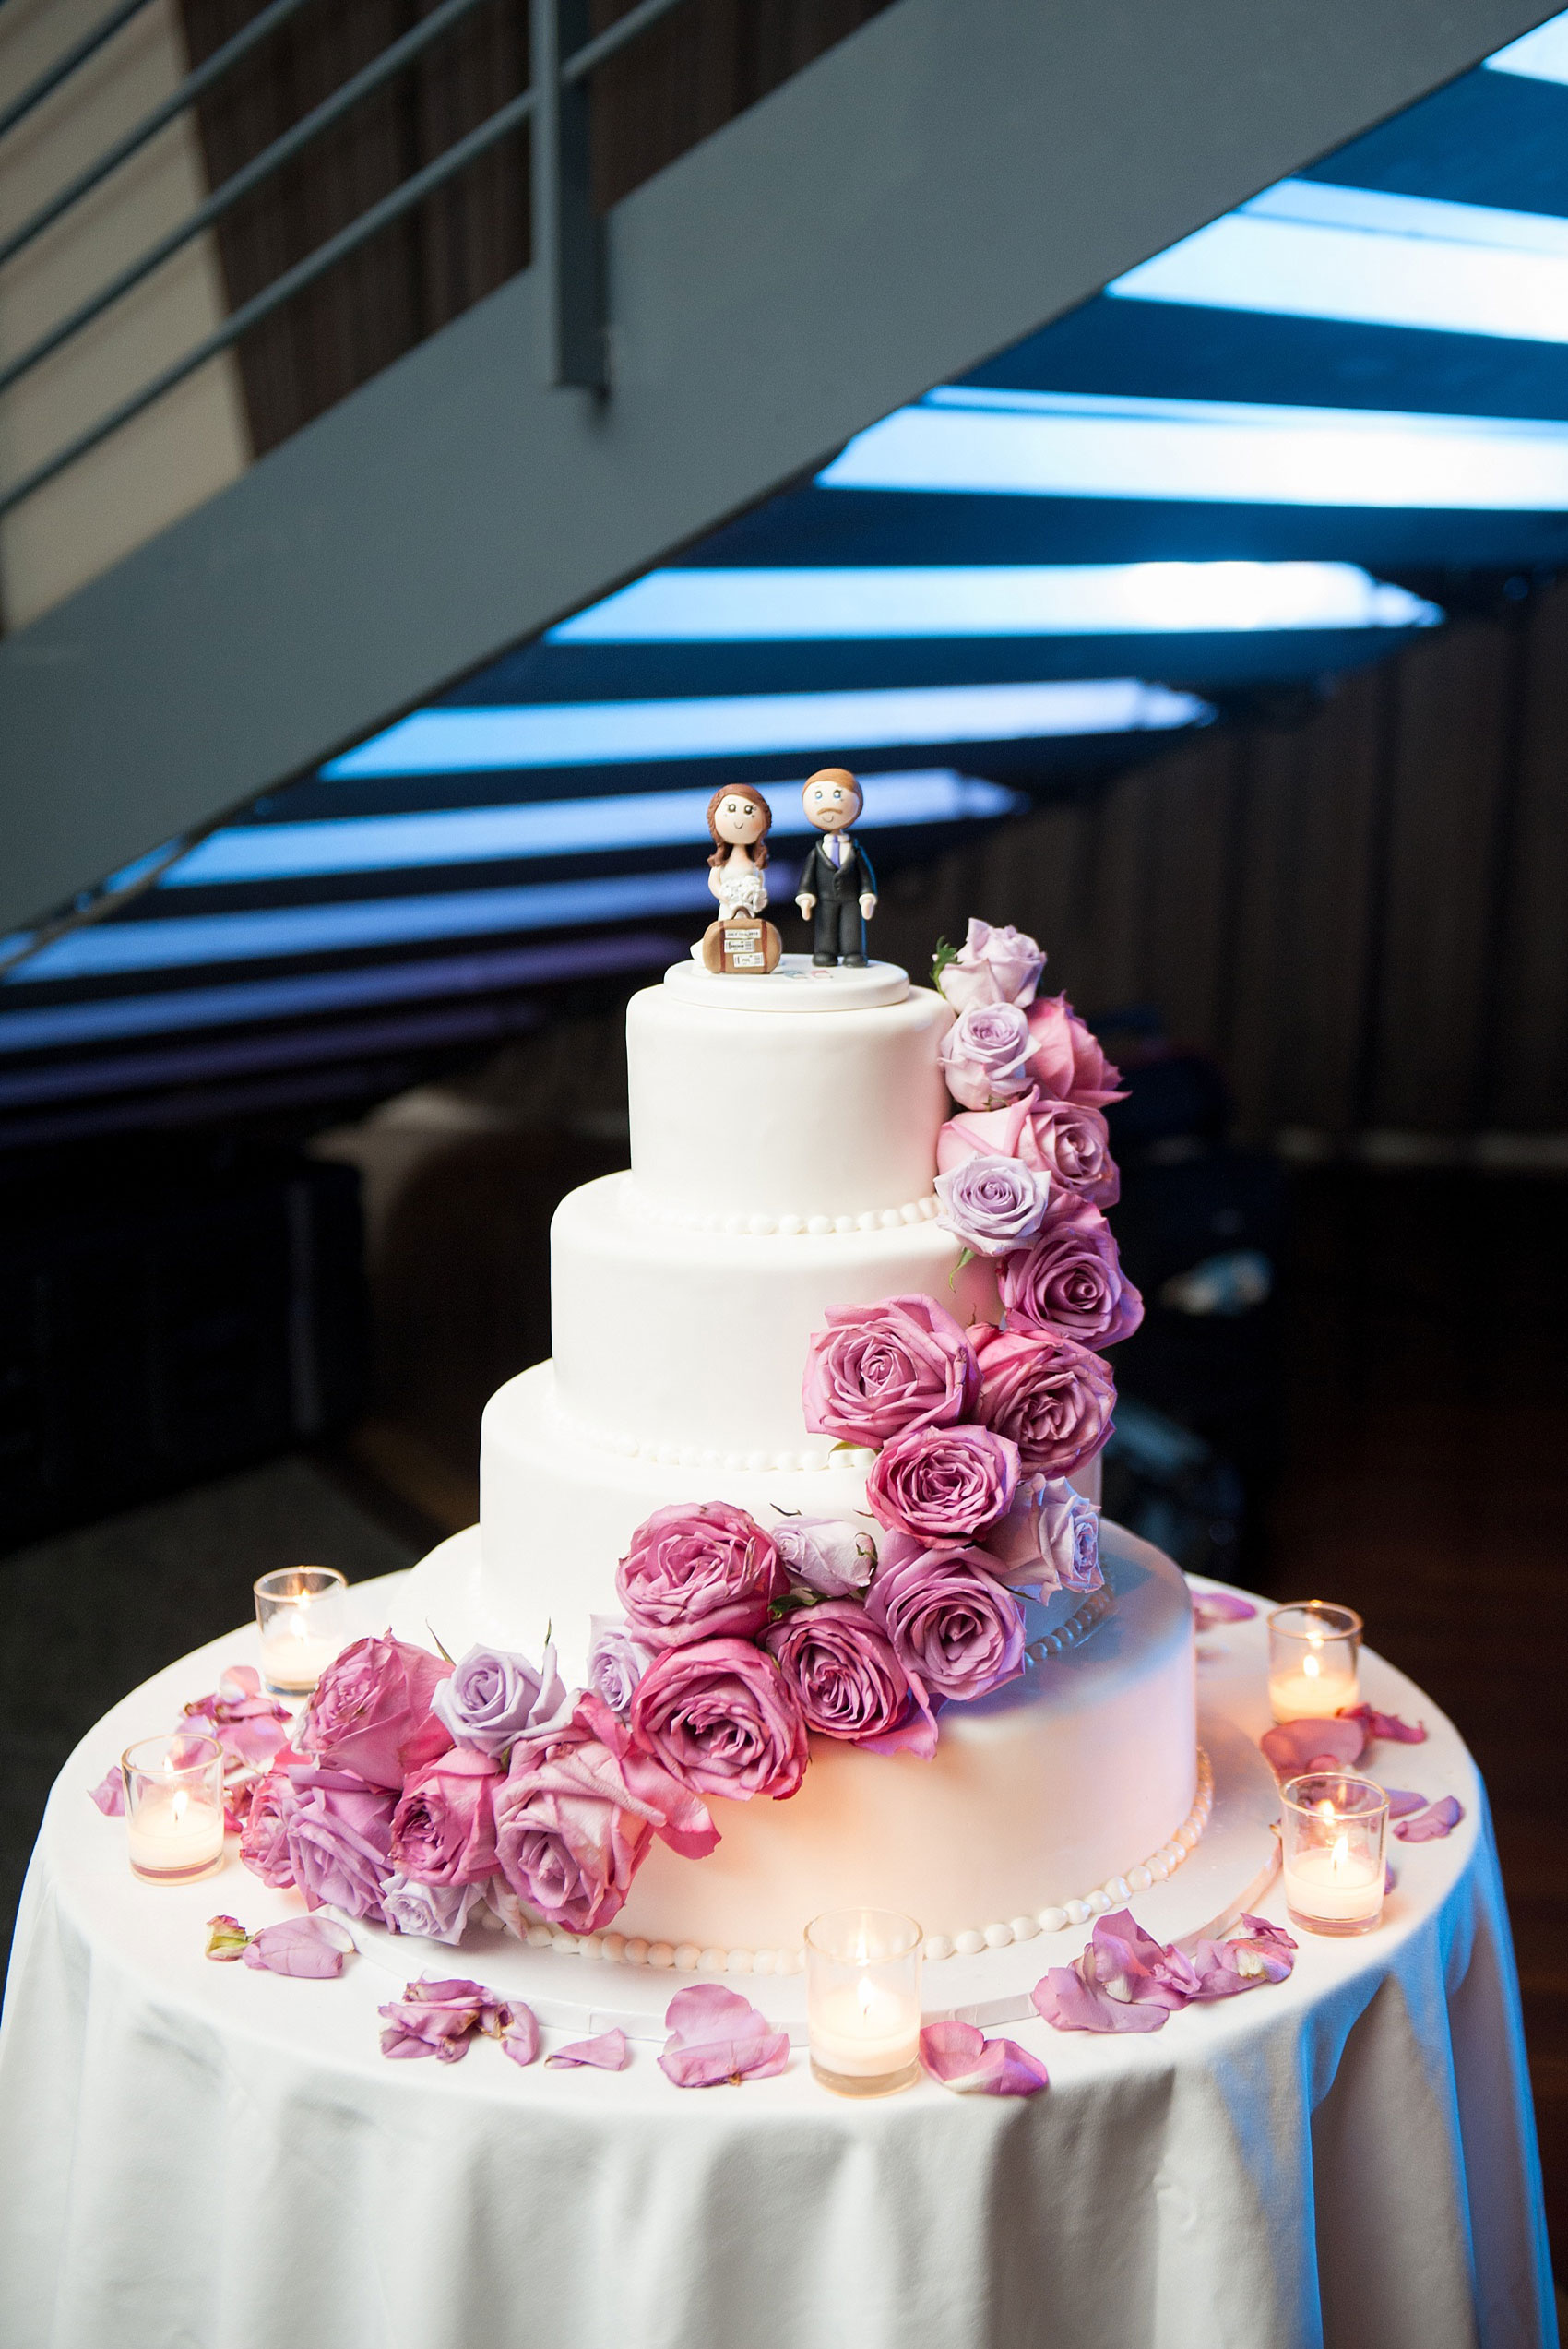 Mikkel Paige Photography photos of a NYC wedding at Tribeca Rooftop. Image of the white fondant, purple rose decorated cake with a clay topper of a traveling couple.